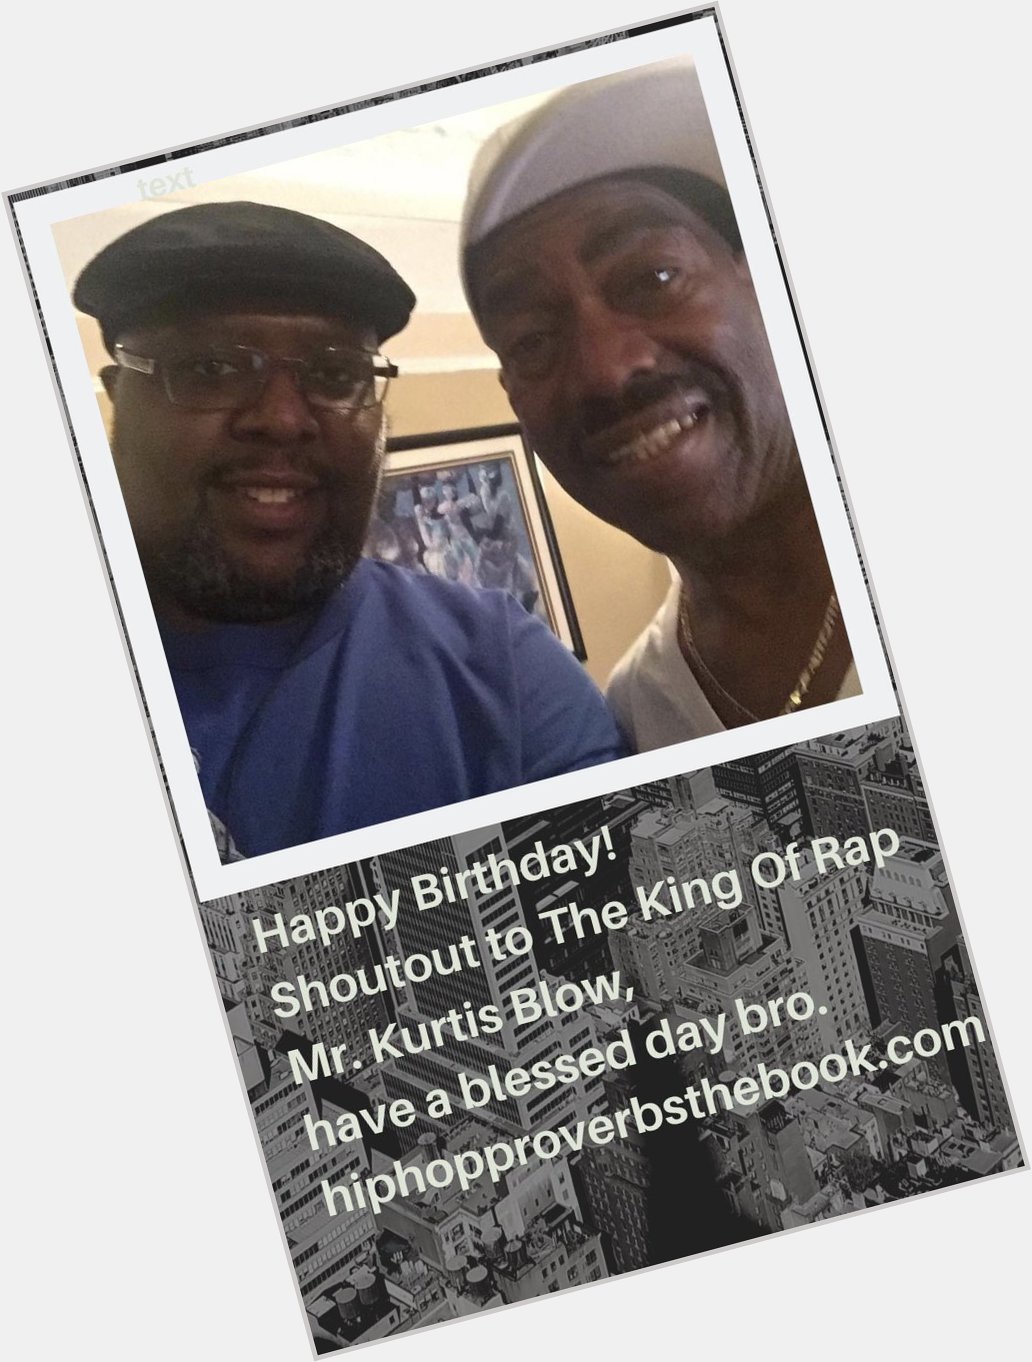 Happy Birthday! Shoutout to The King Of Rap Mr. Kurtis Blow, have a blessed day bro.  